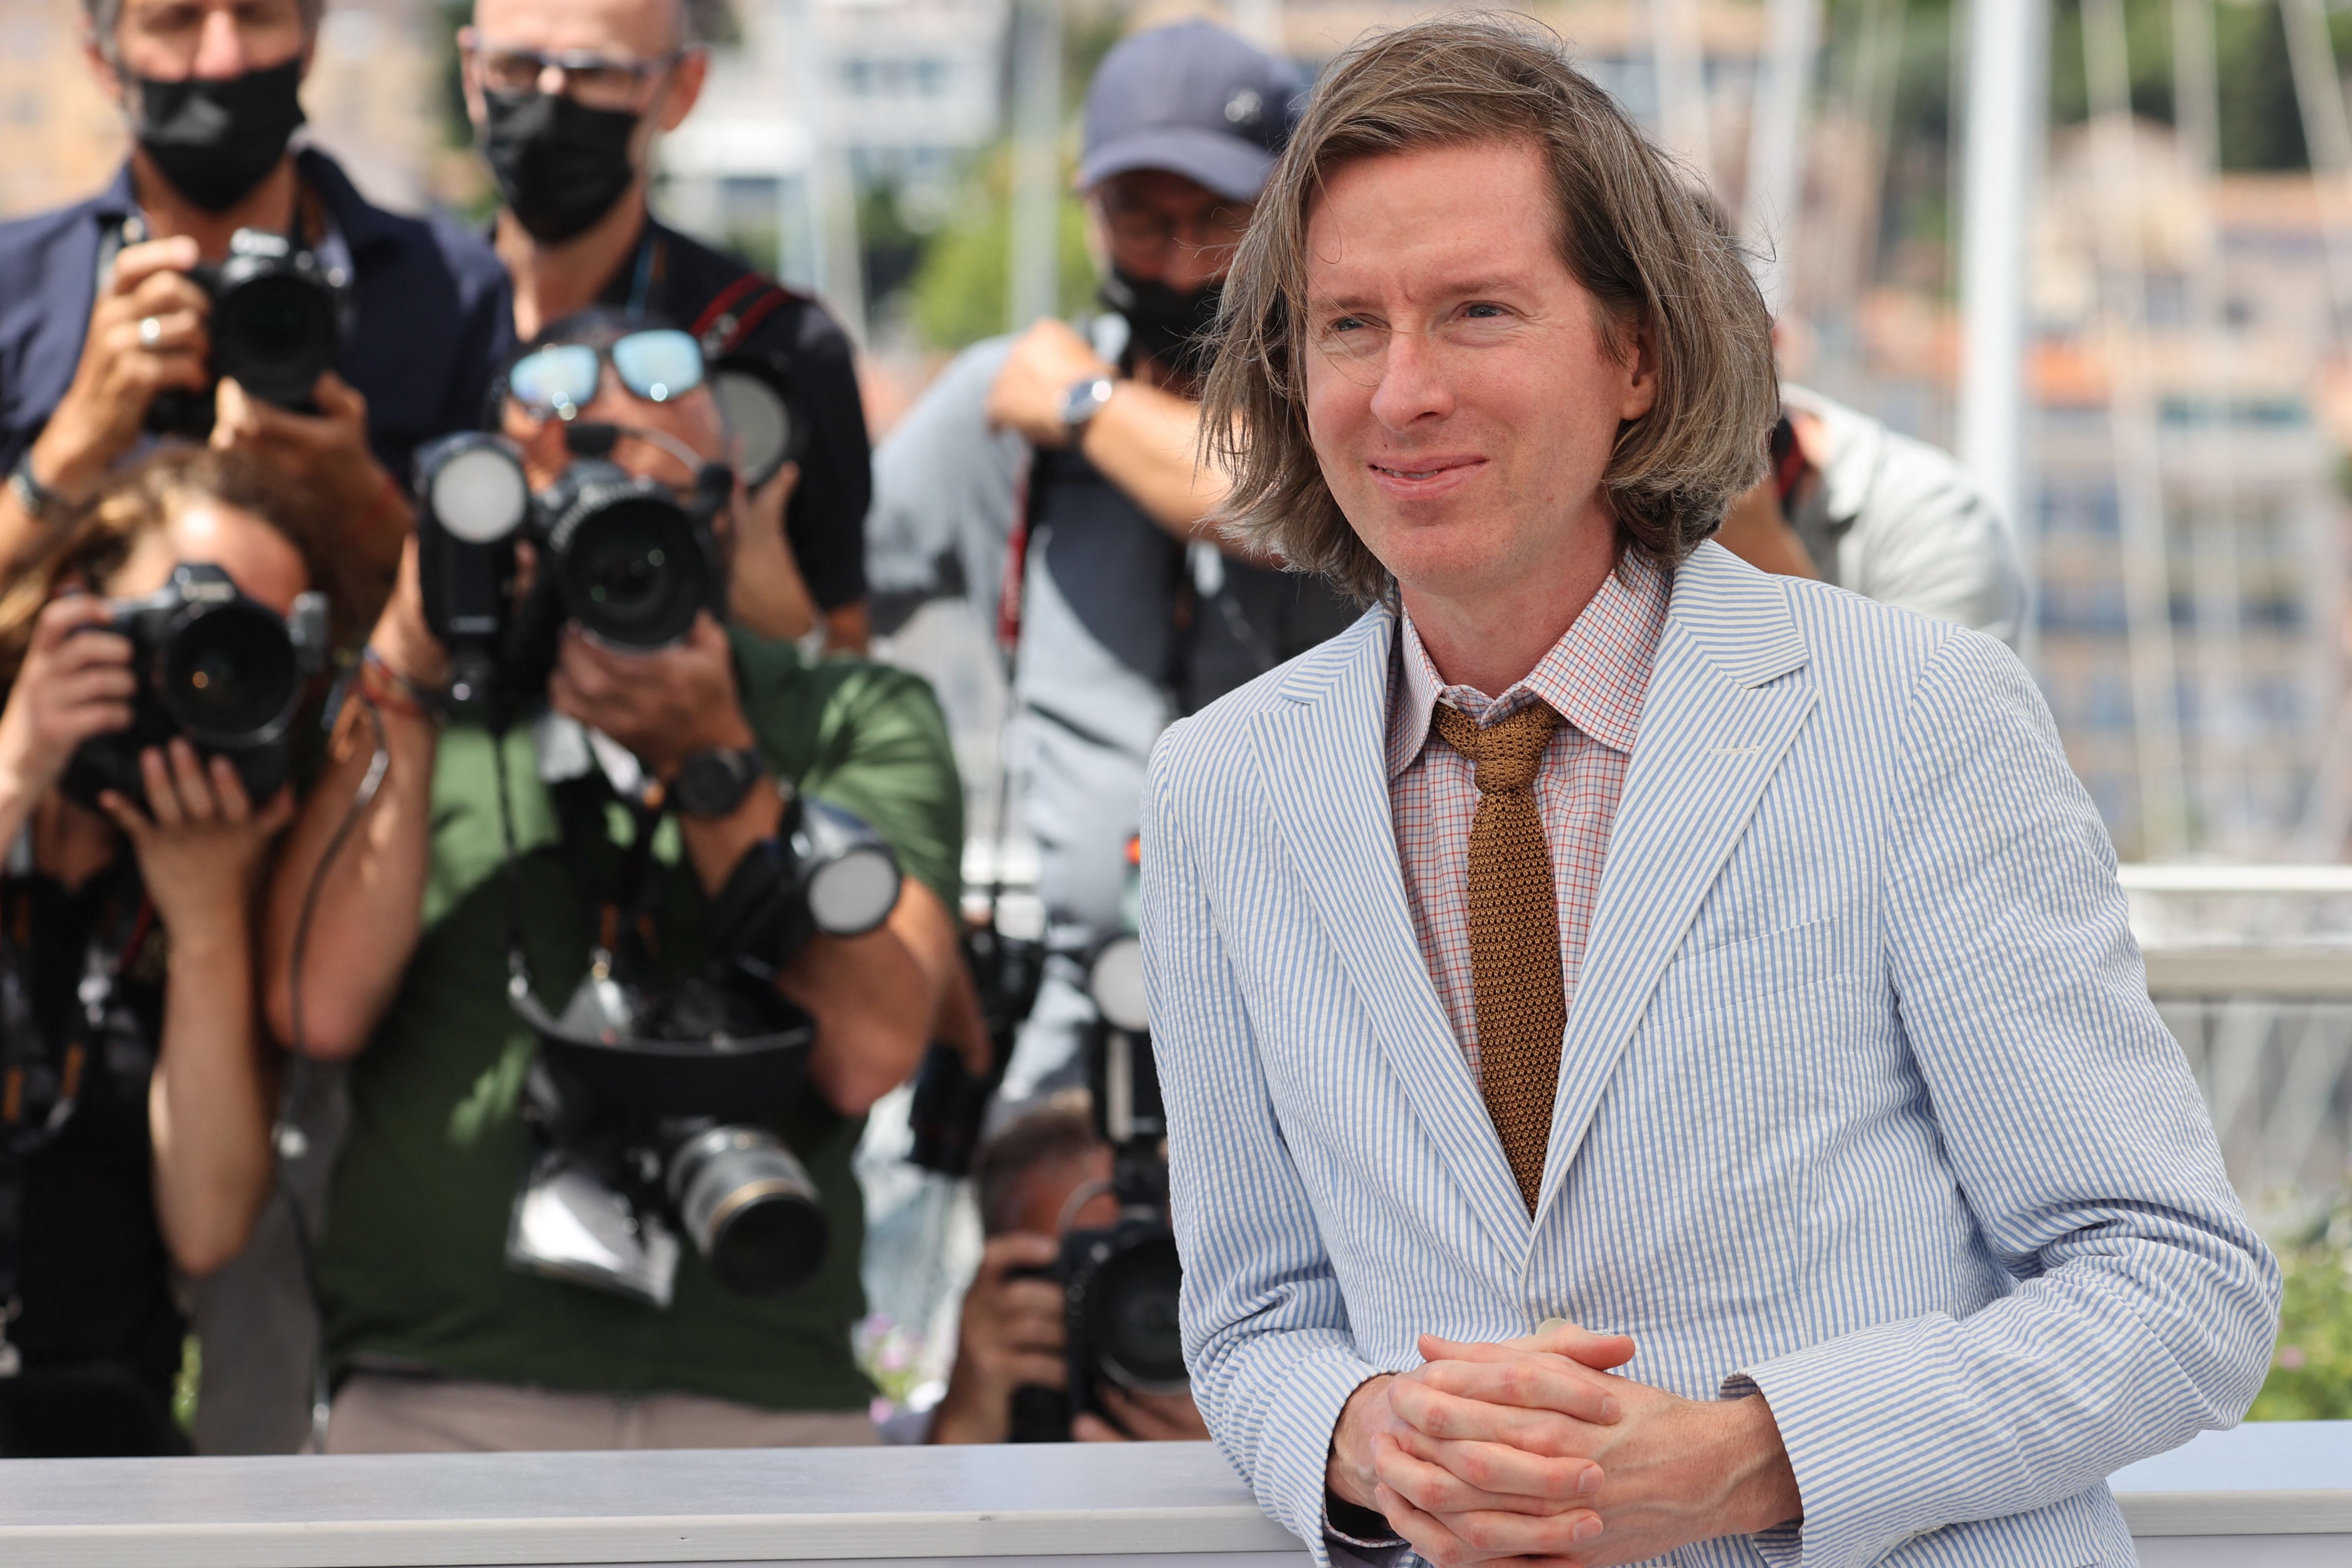 Us director Wes Anderson poses during a photocall for the film "The French Dispatch" at the 74th edition of the Cannes Film Festival in Cannes, southern France, on July 13, 2021. 